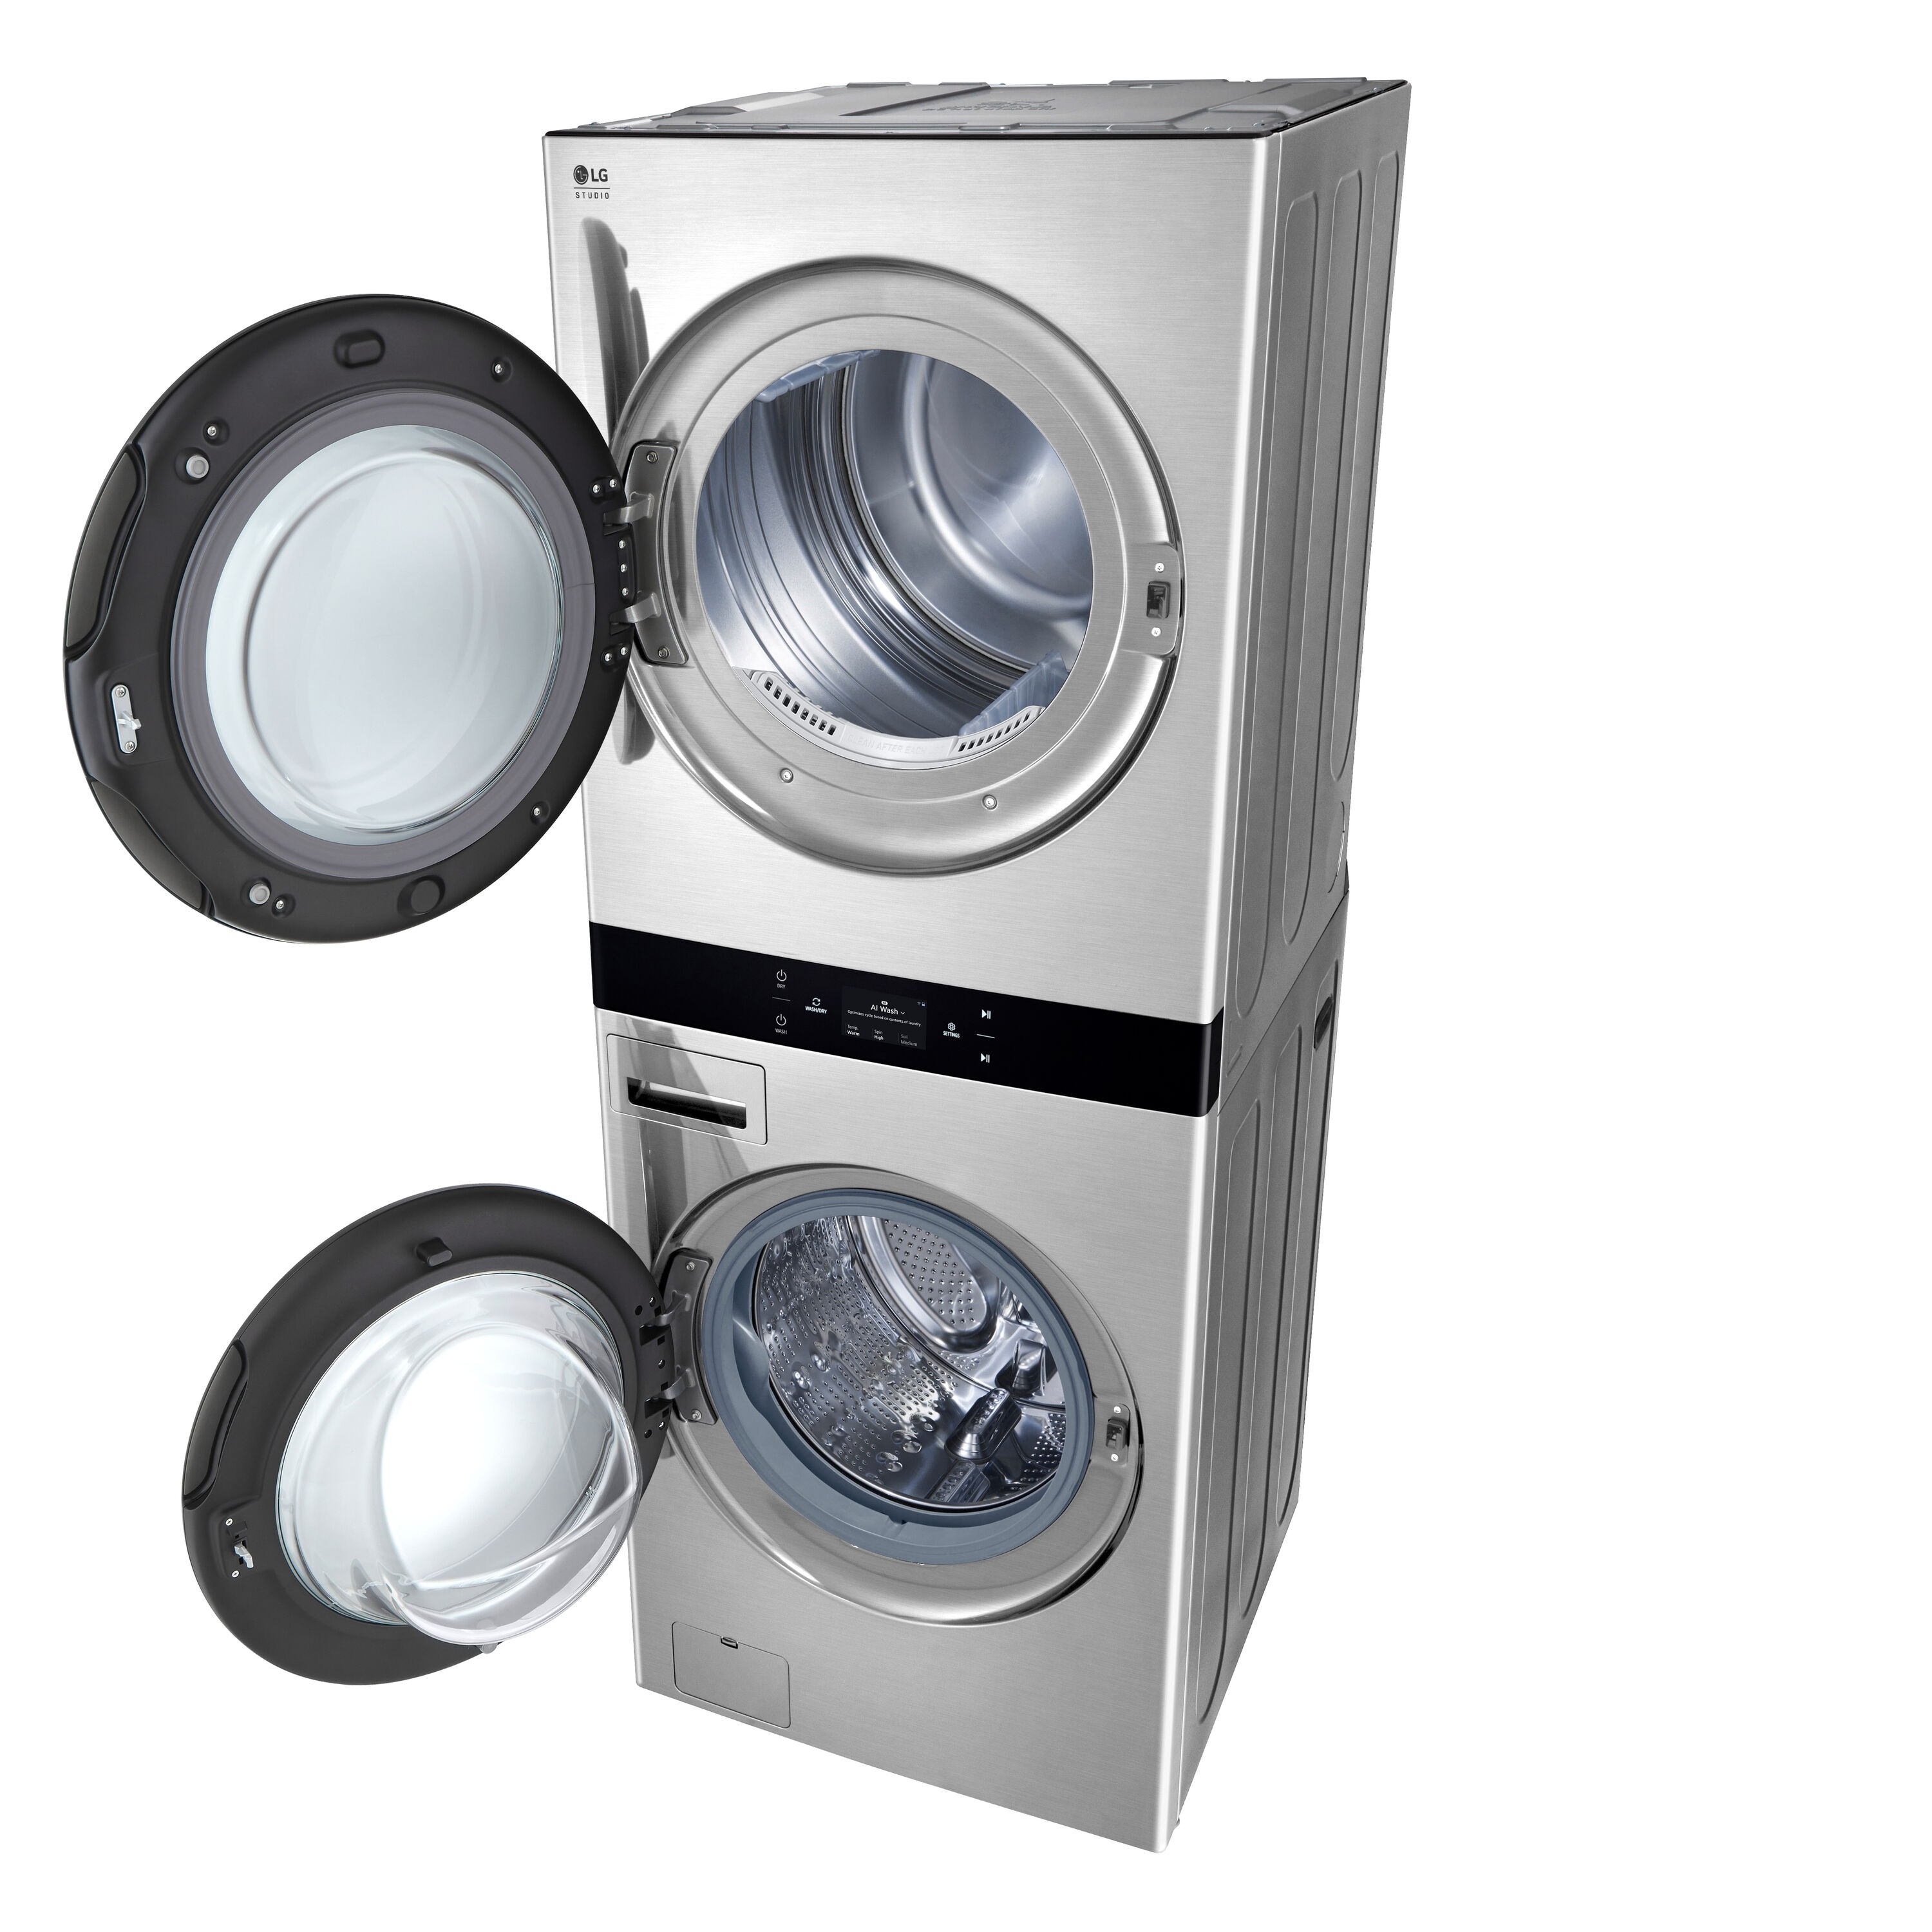 LG STUDIO WashTower Electric Stacked Centers and ft (ENERGY at the ft Laundry 7.4-cu with Dryer 5-cu STAR) Center Laundry in Stacked department Washer